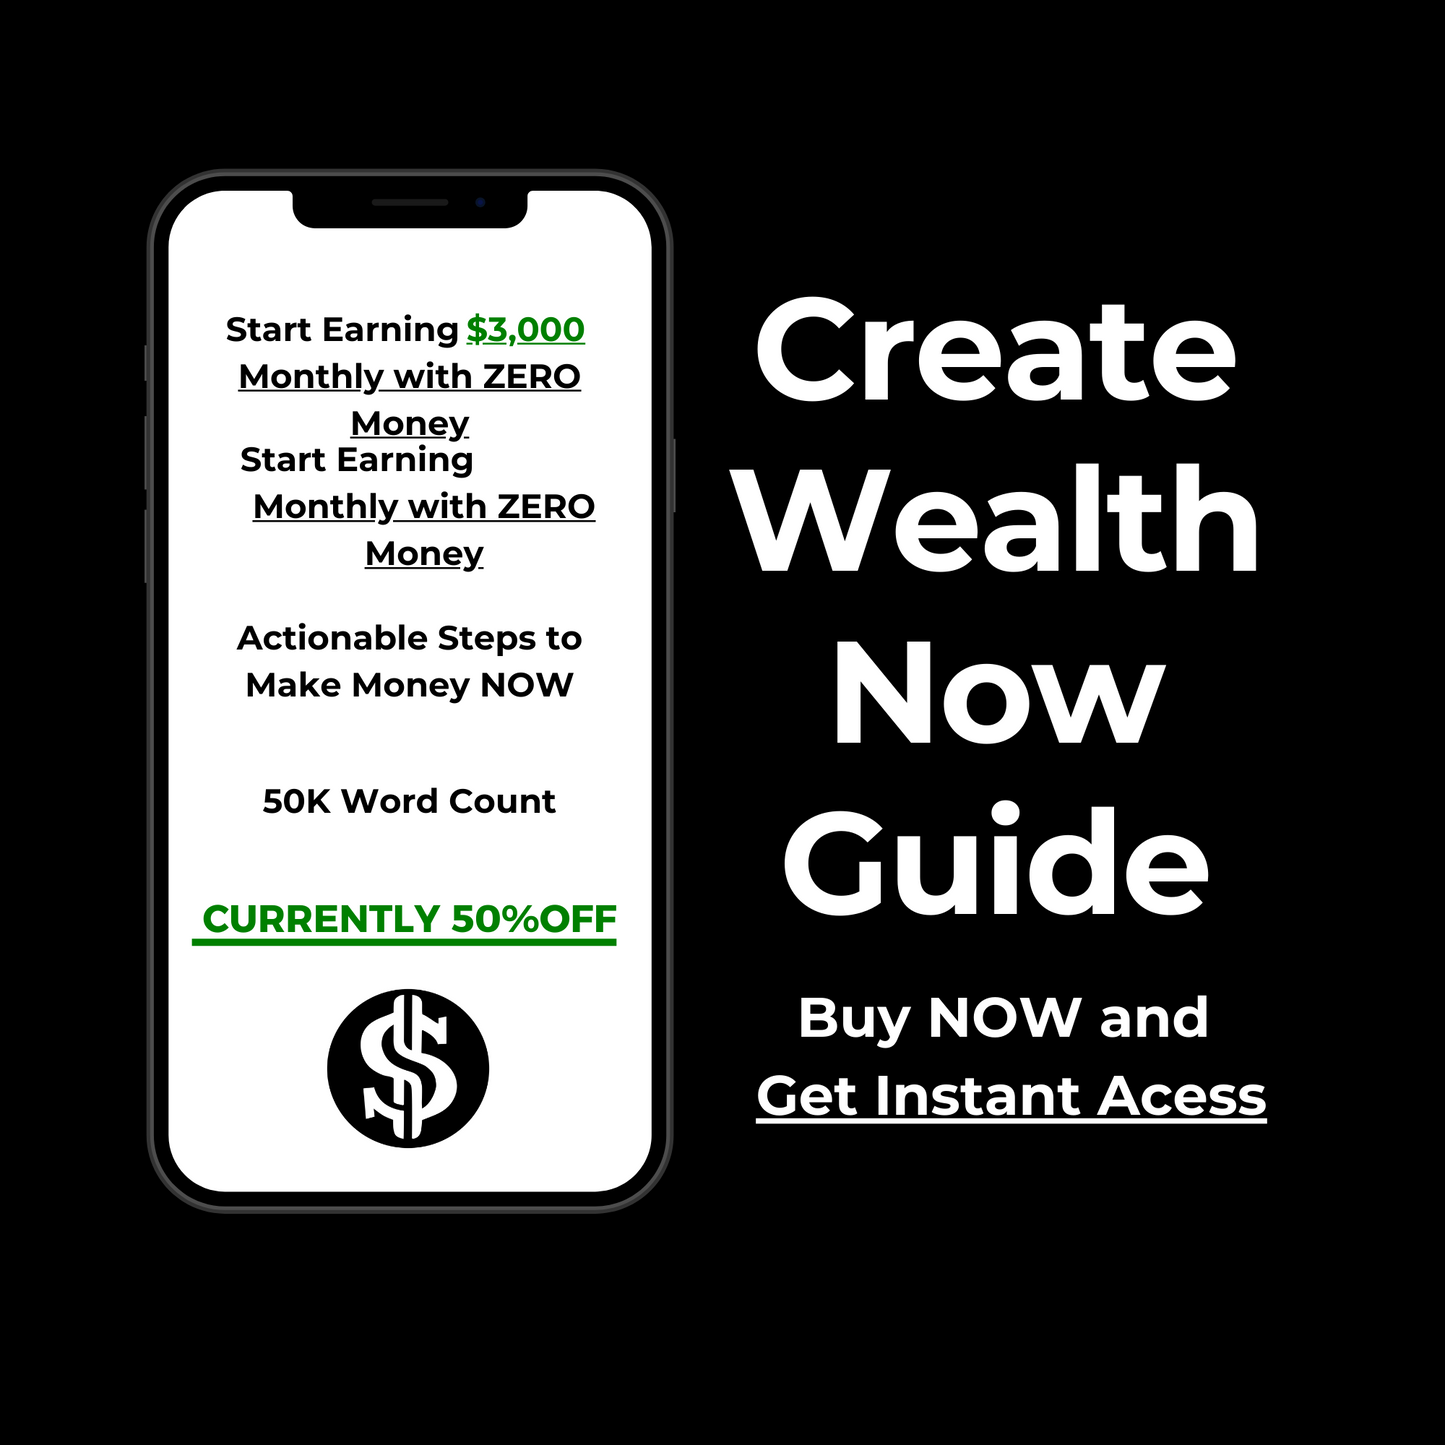 Create Wealth NOW Guide